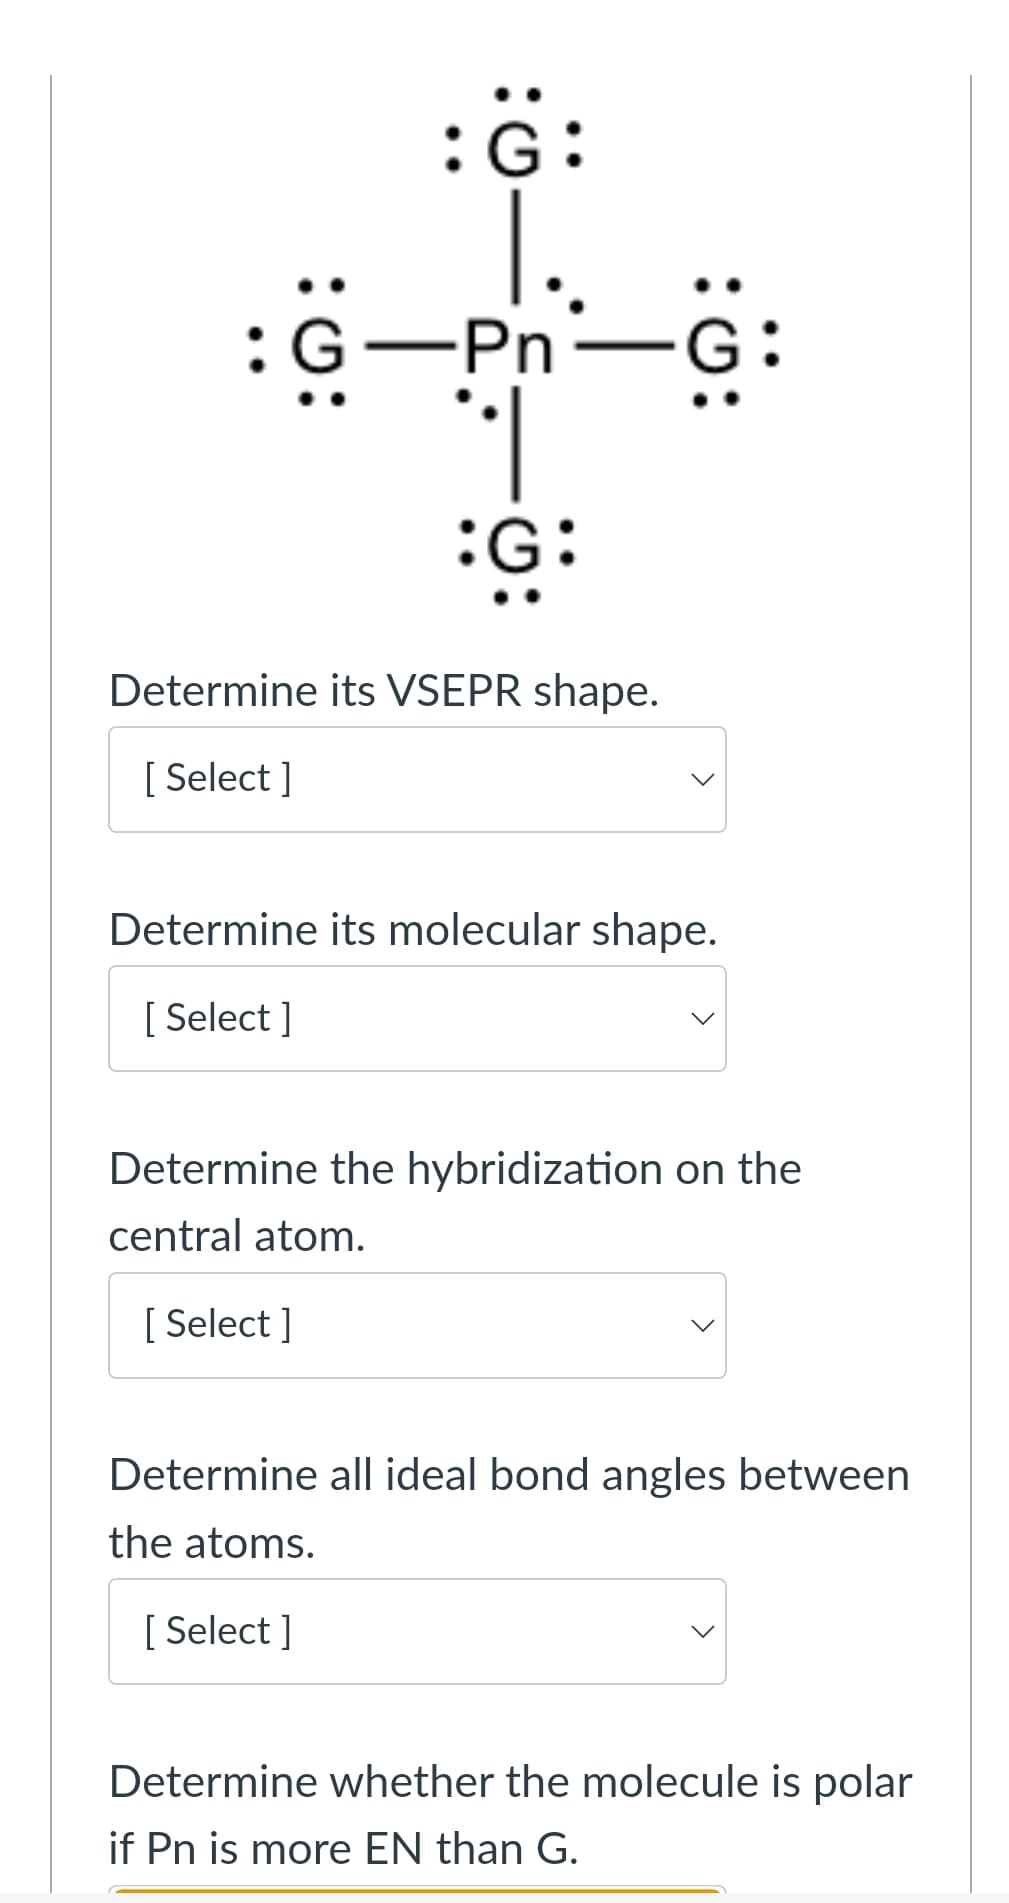 :
:G:
G-Pn-G:
:G:
Determine its VSEPR shape.
[Select]
Determine its molecular shape.
[Select]
Determine the hybridization on the
central atom.
[Select]
Determine all ideal bond angles between
the atoms.
[Select]
Determine whether the molecule is polar
if Pn is more EN than G.